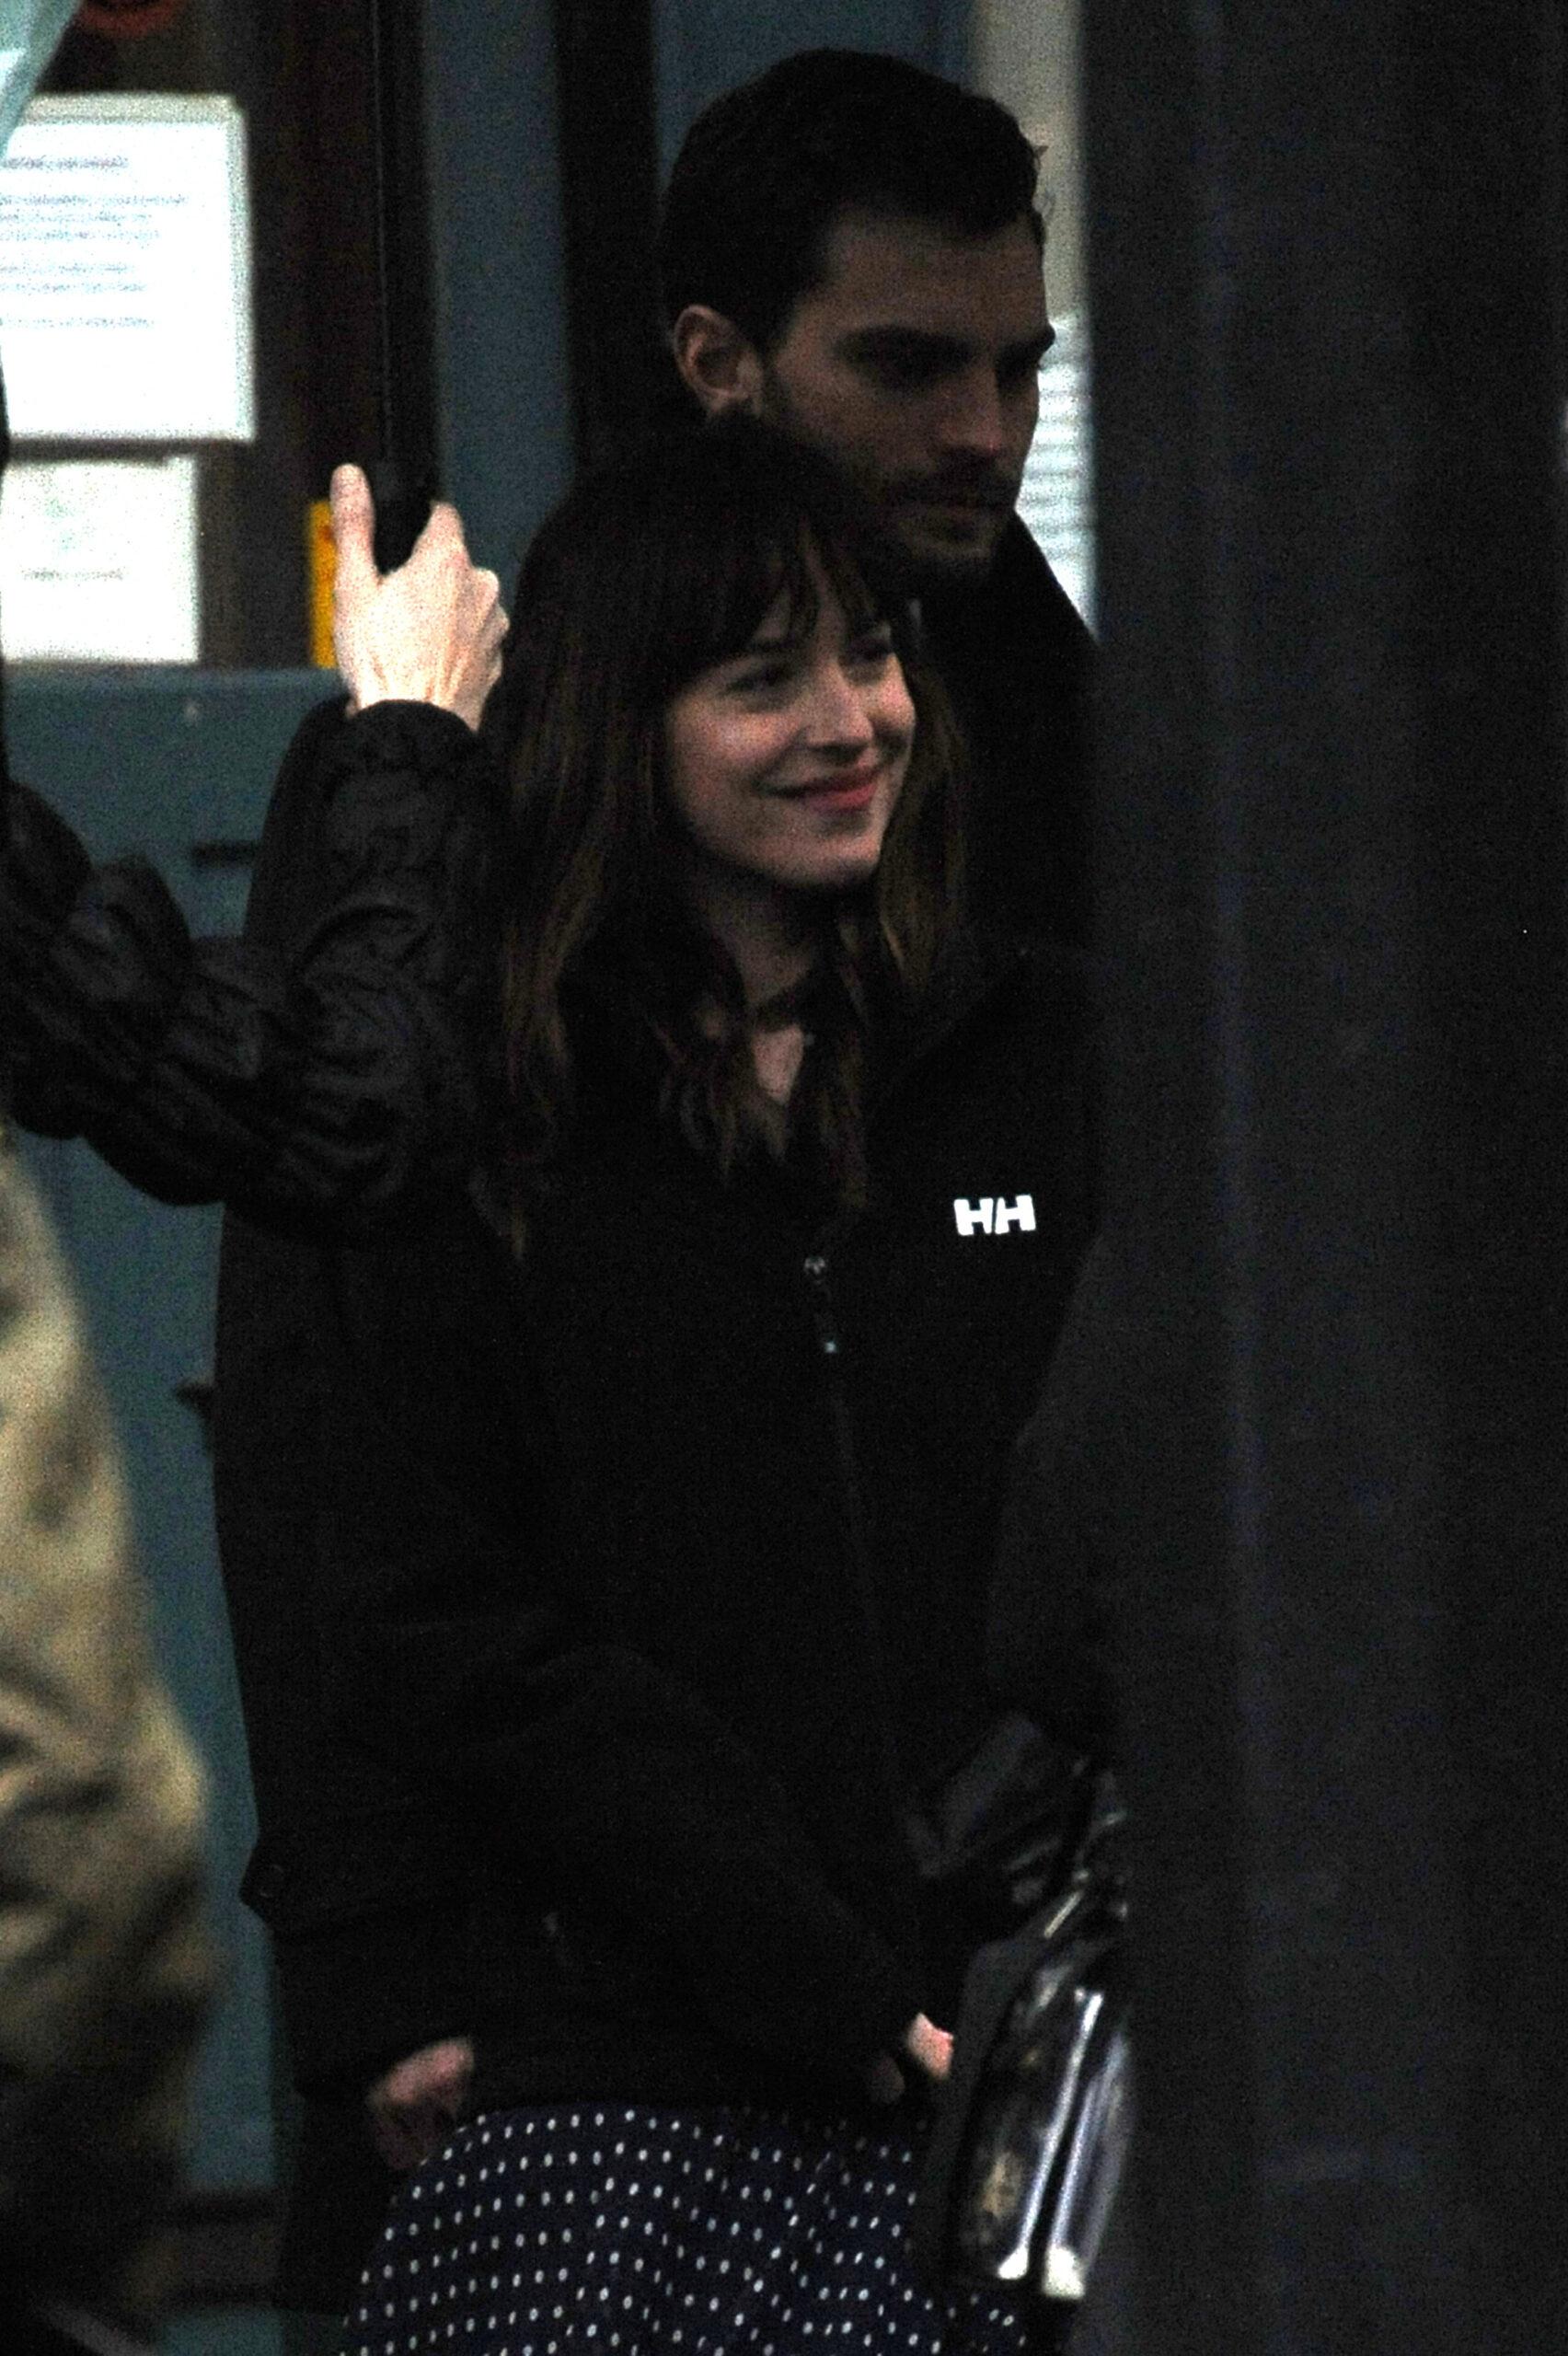 Dakota Johnson rushes into the arms of Jamie Dornan on set of Fifty Shades Darker in Vancouver!